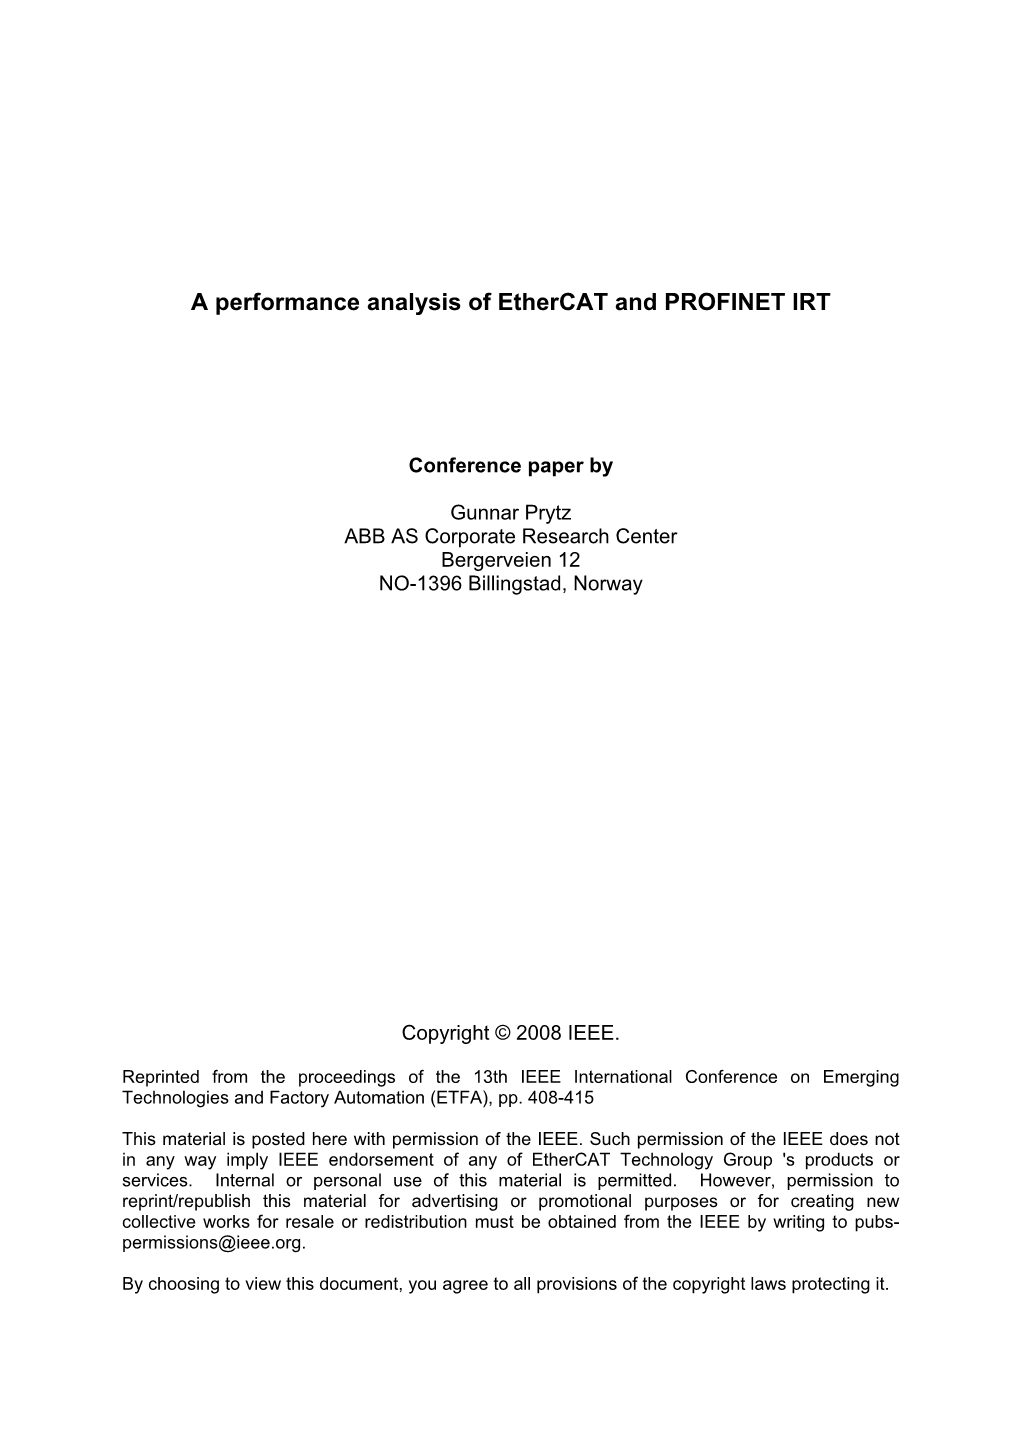 A Performance Analysis of Ethercat and PROFINET IRT